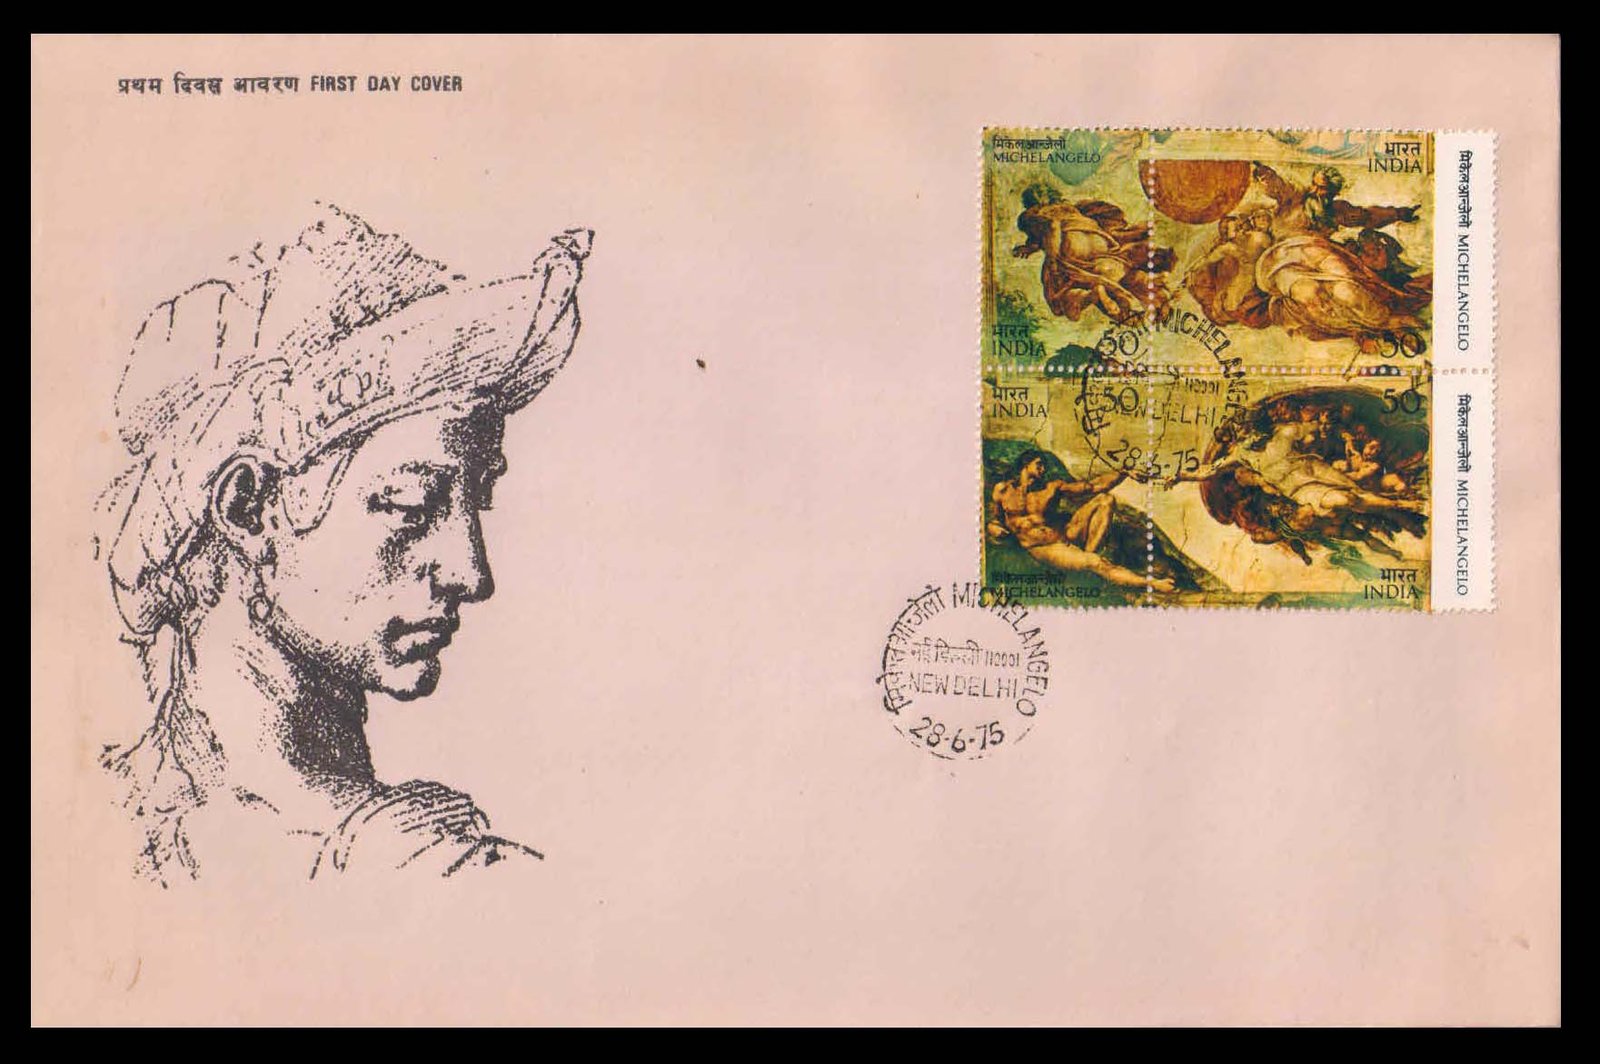 INDIA 28-6-1975, Michelangelo, Setenant Block of 4 on First Day Cover